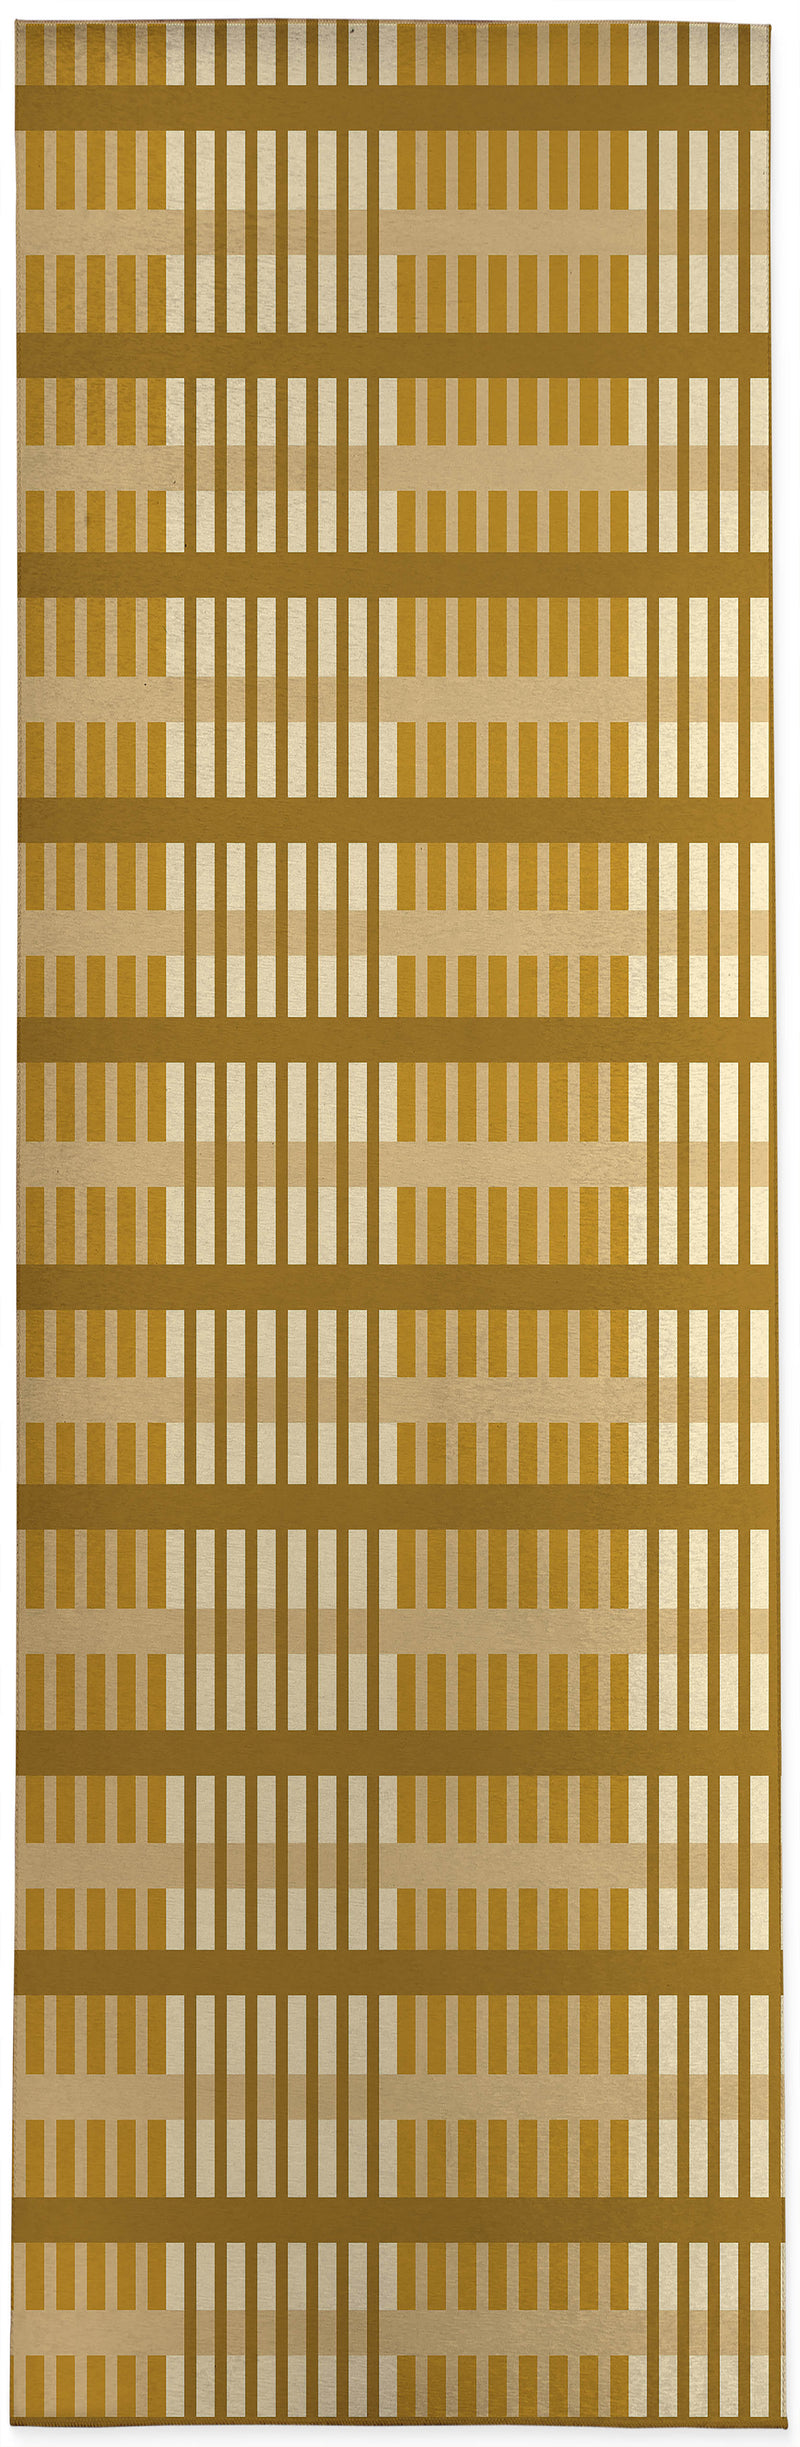 GRAPHIC RETRO WEAVE Kitchen Mat By House of Haha